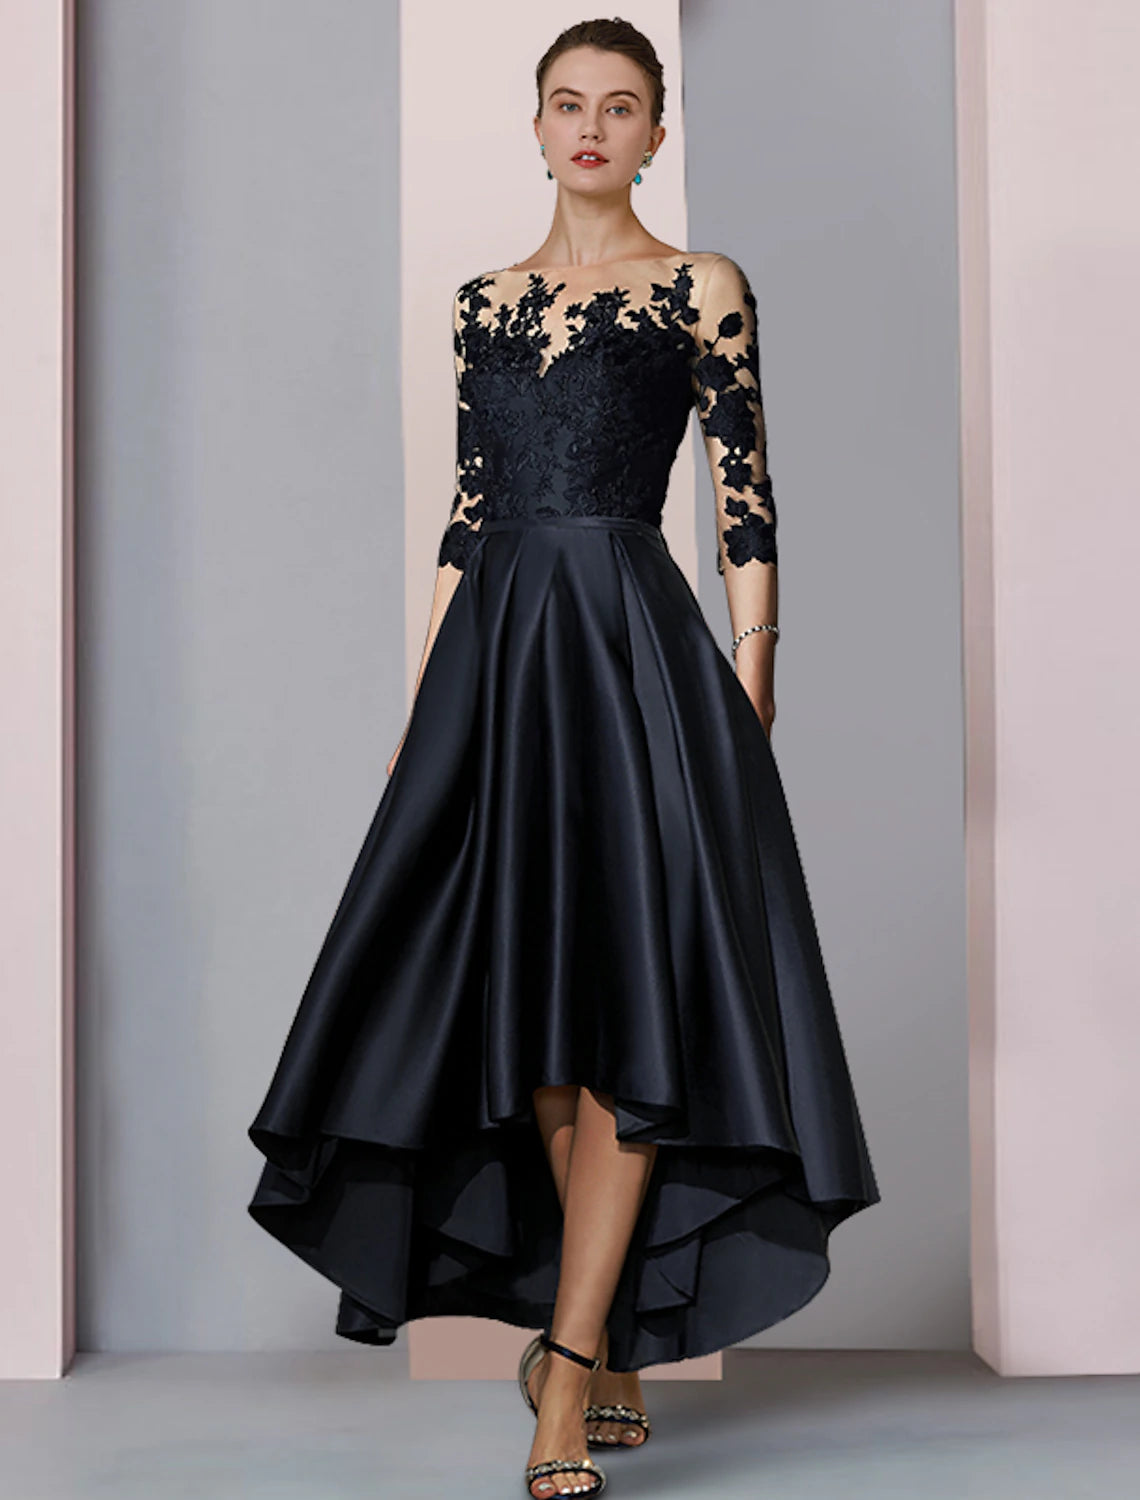 A-Line Mother of the Bride Dress Fall Wedding Guest Elegant High Low Scoop Neck Asymmetrical Tea Length Satin Lace 3/4 Length Sleeve with Pleats Appliques